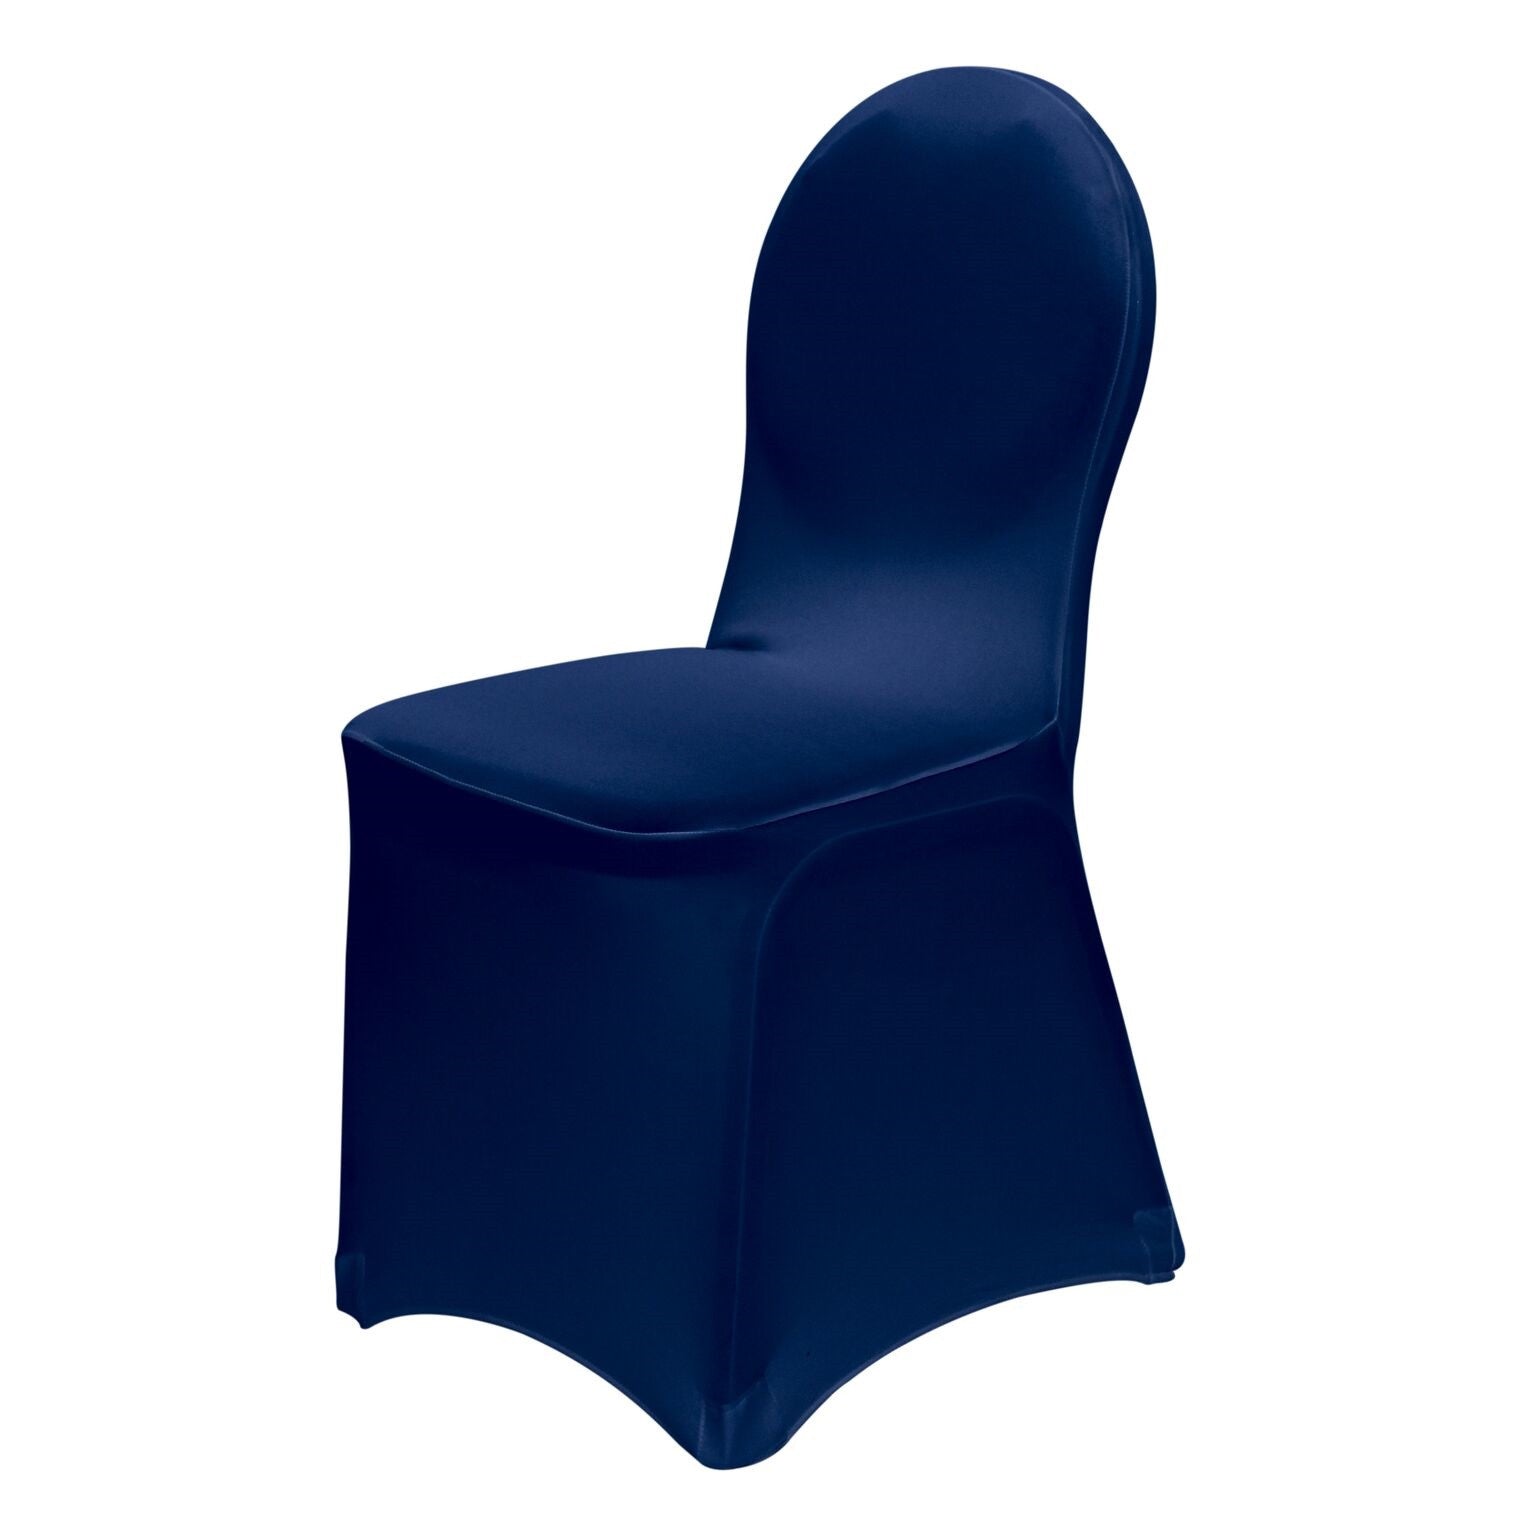 Navy Blue skirt spandex BANQUET chair covers wholesale